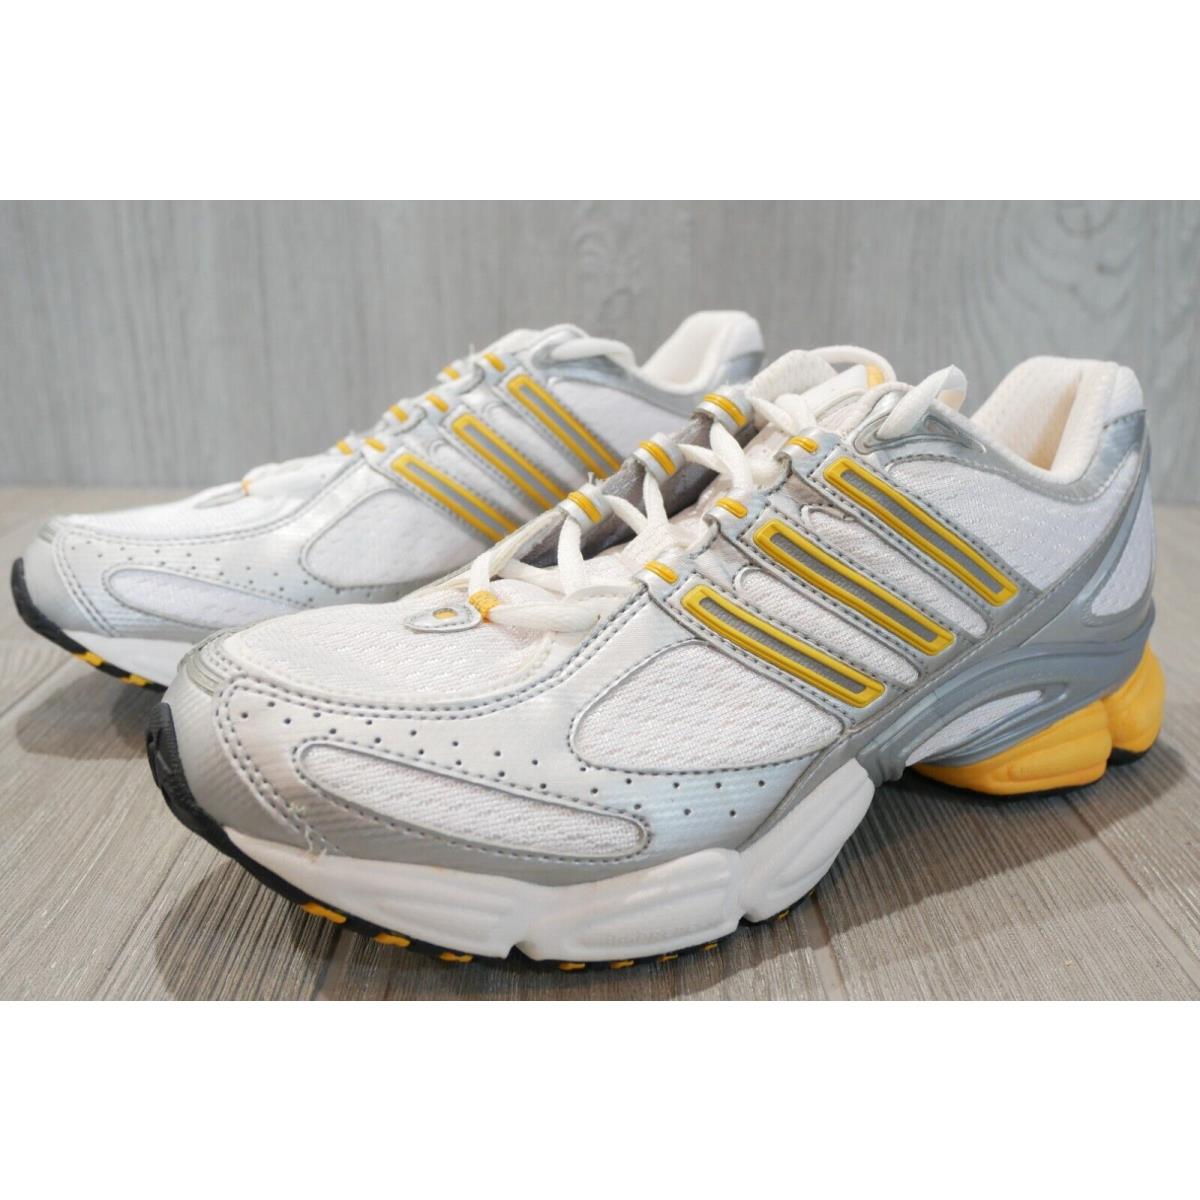 Vintage Adidas A3 FW Yellow Shoes Womens Size 8.5 Oss | - Adidas shoes - Yellow |